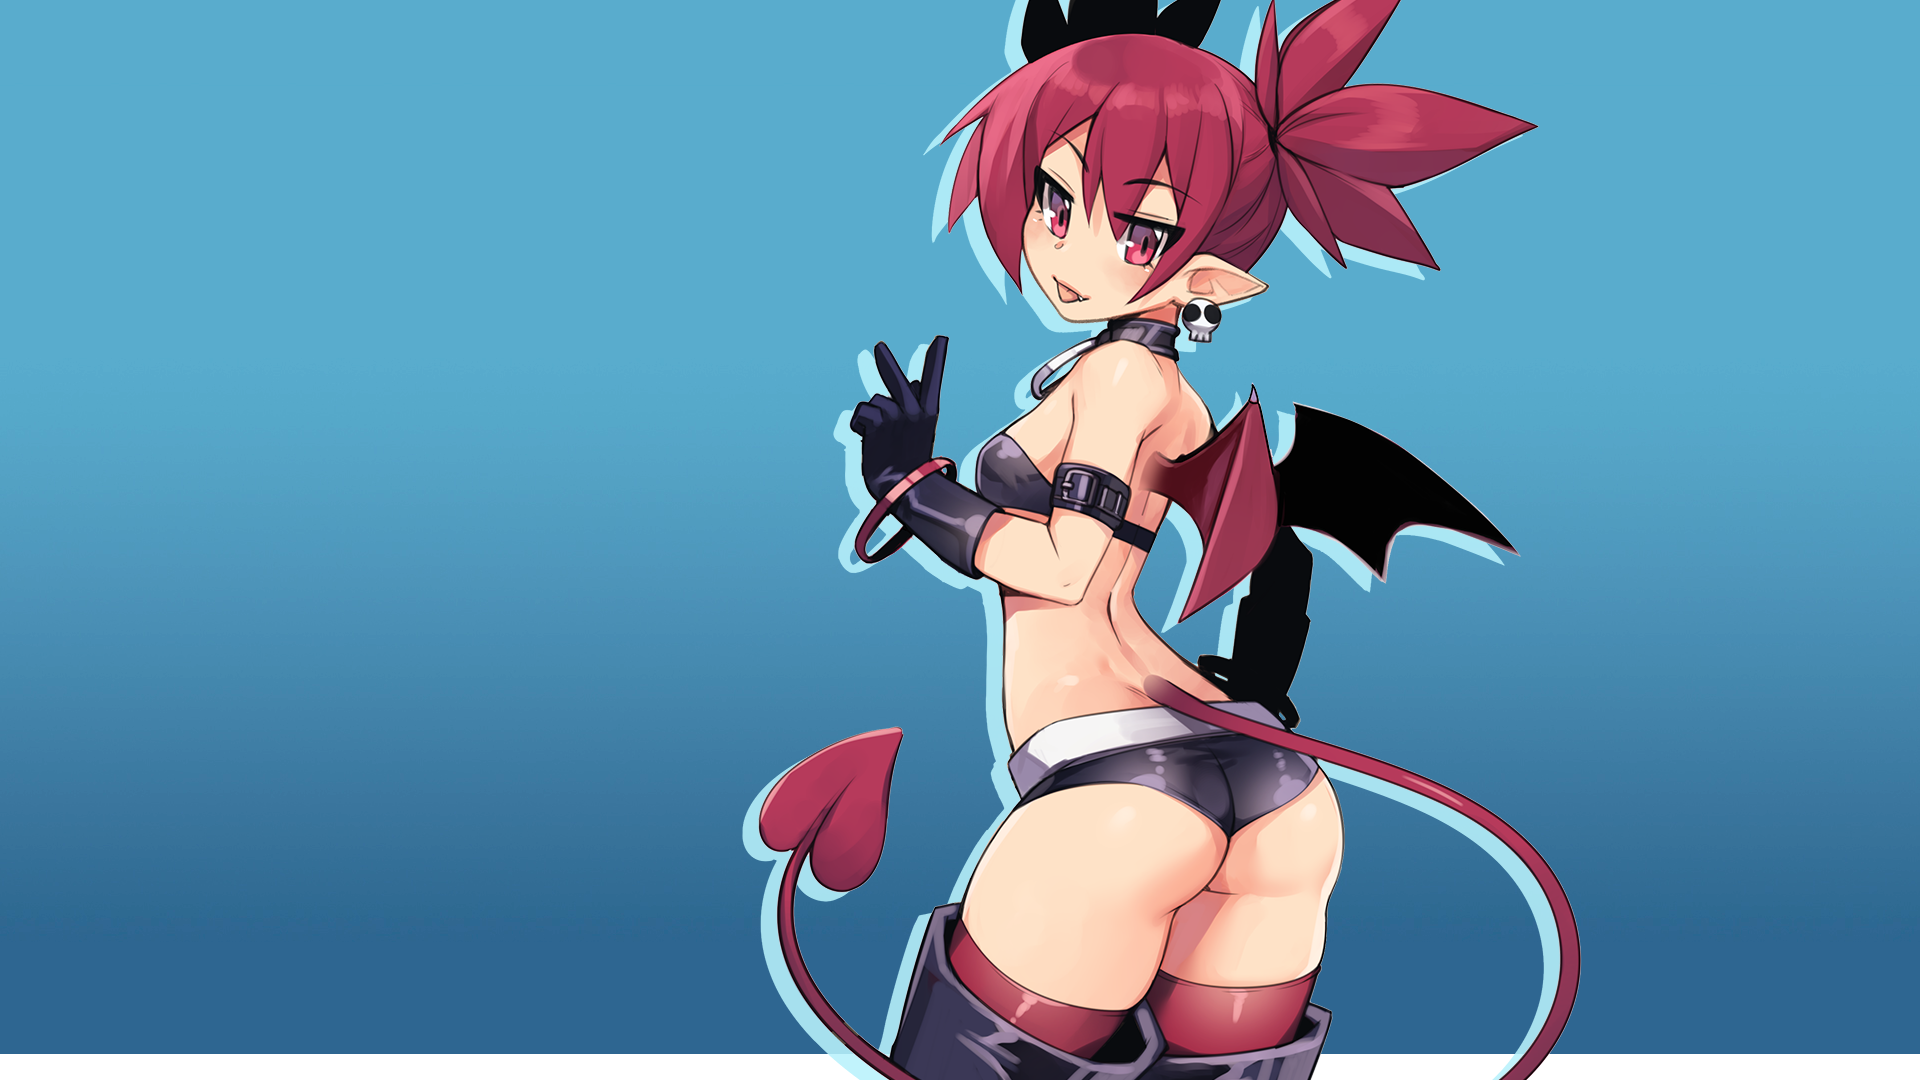 Anime 1920x1080 anime girls Etna ass demon Disgaea simple background blue background peace sign short shorts minimalism pointy ears succubus demon tail demon girls bat wings gloves looking at viewer tongue out redhead choker